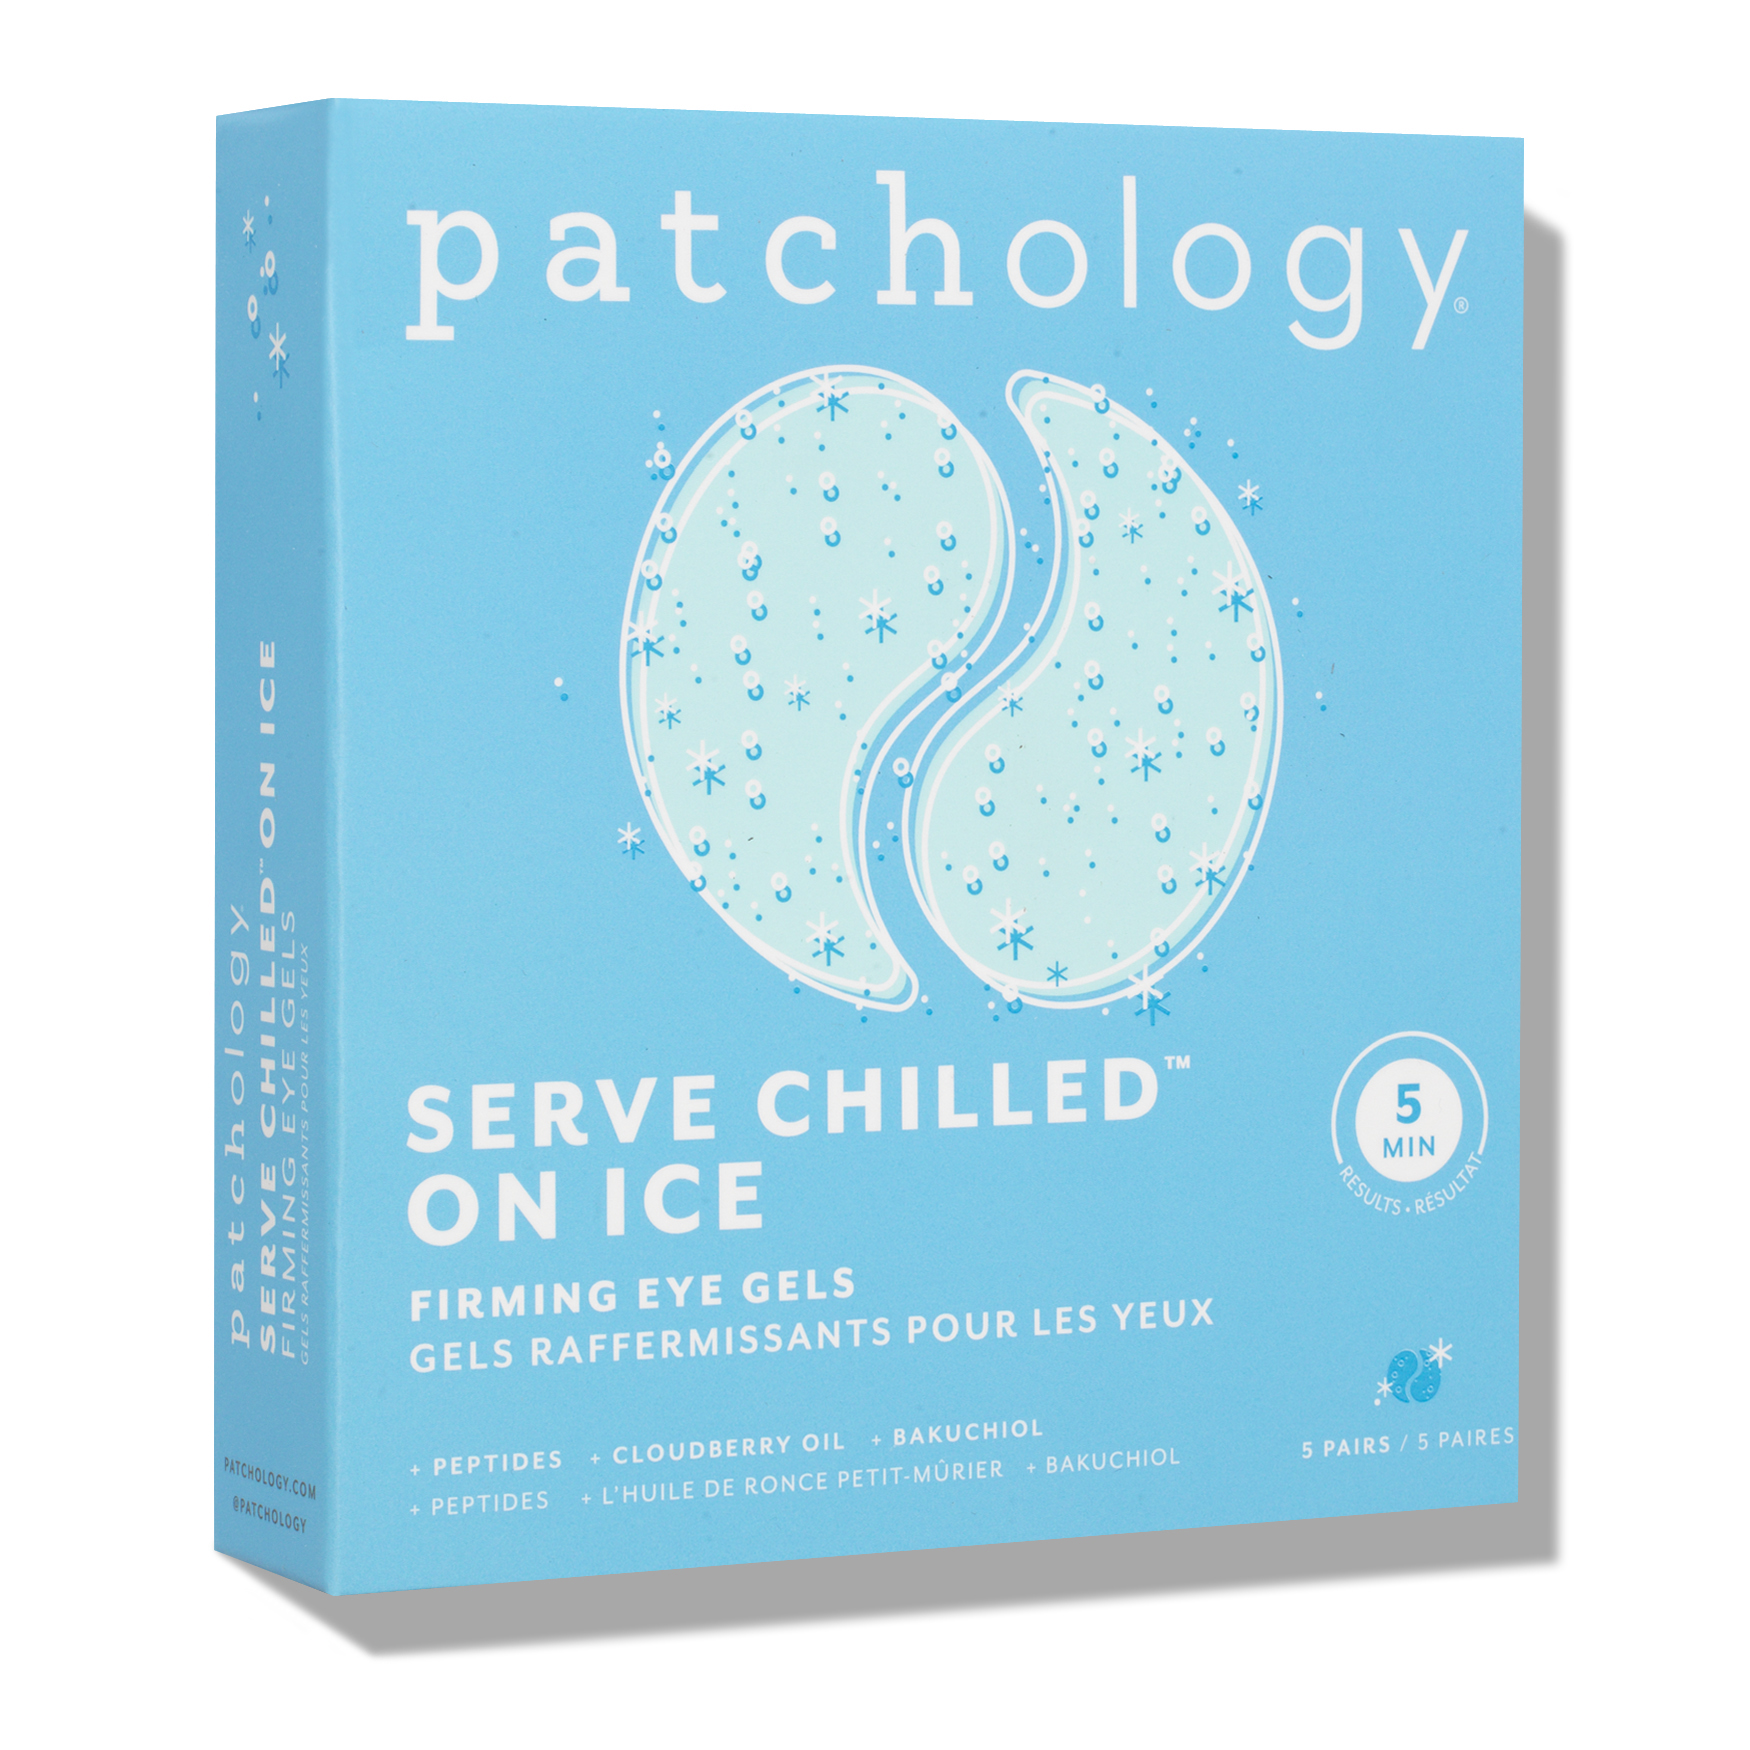 Patchology Eye Gels - Chilled Eye Patches for Puffy Eyes, Dark